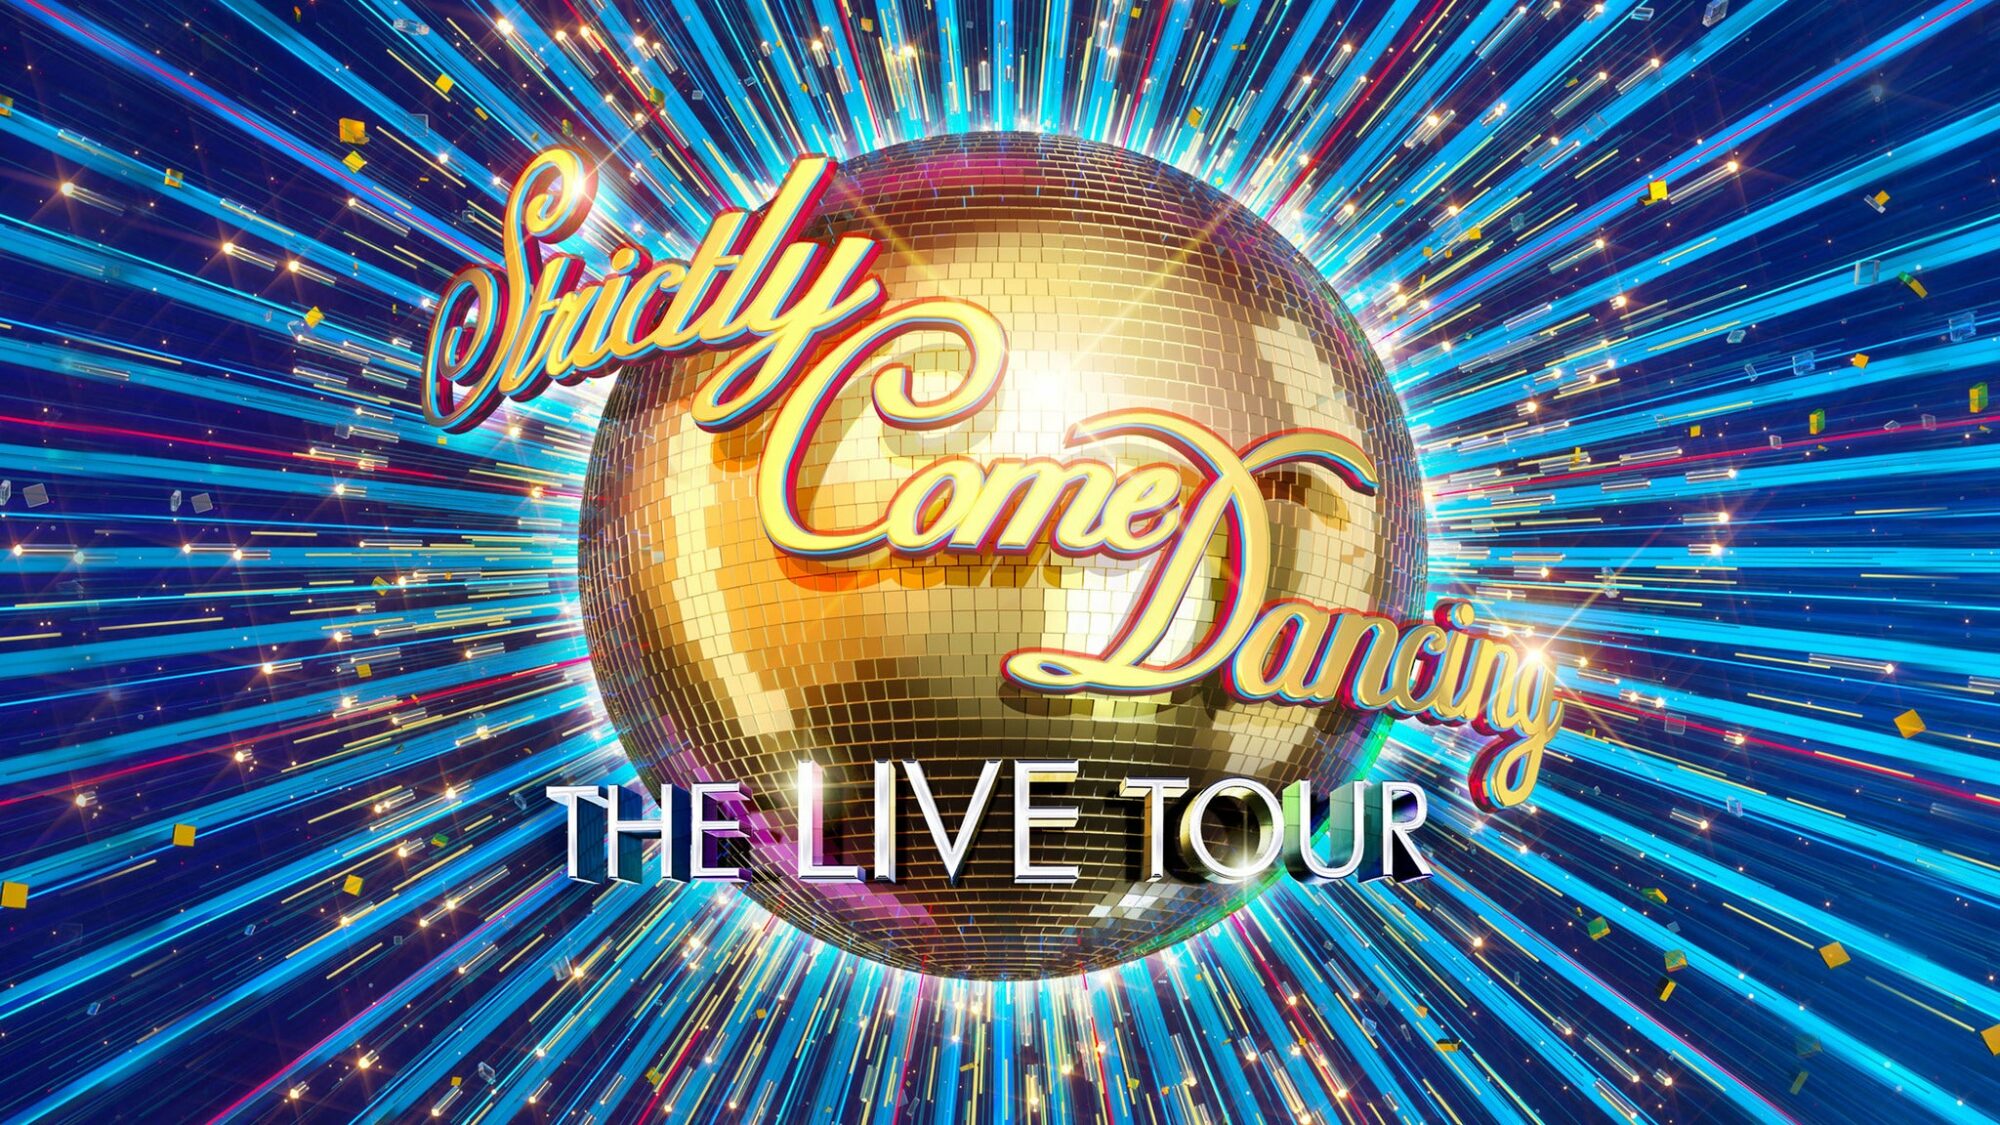 Strictly Come Dancing Hospitality Experiences at Utilita Arena